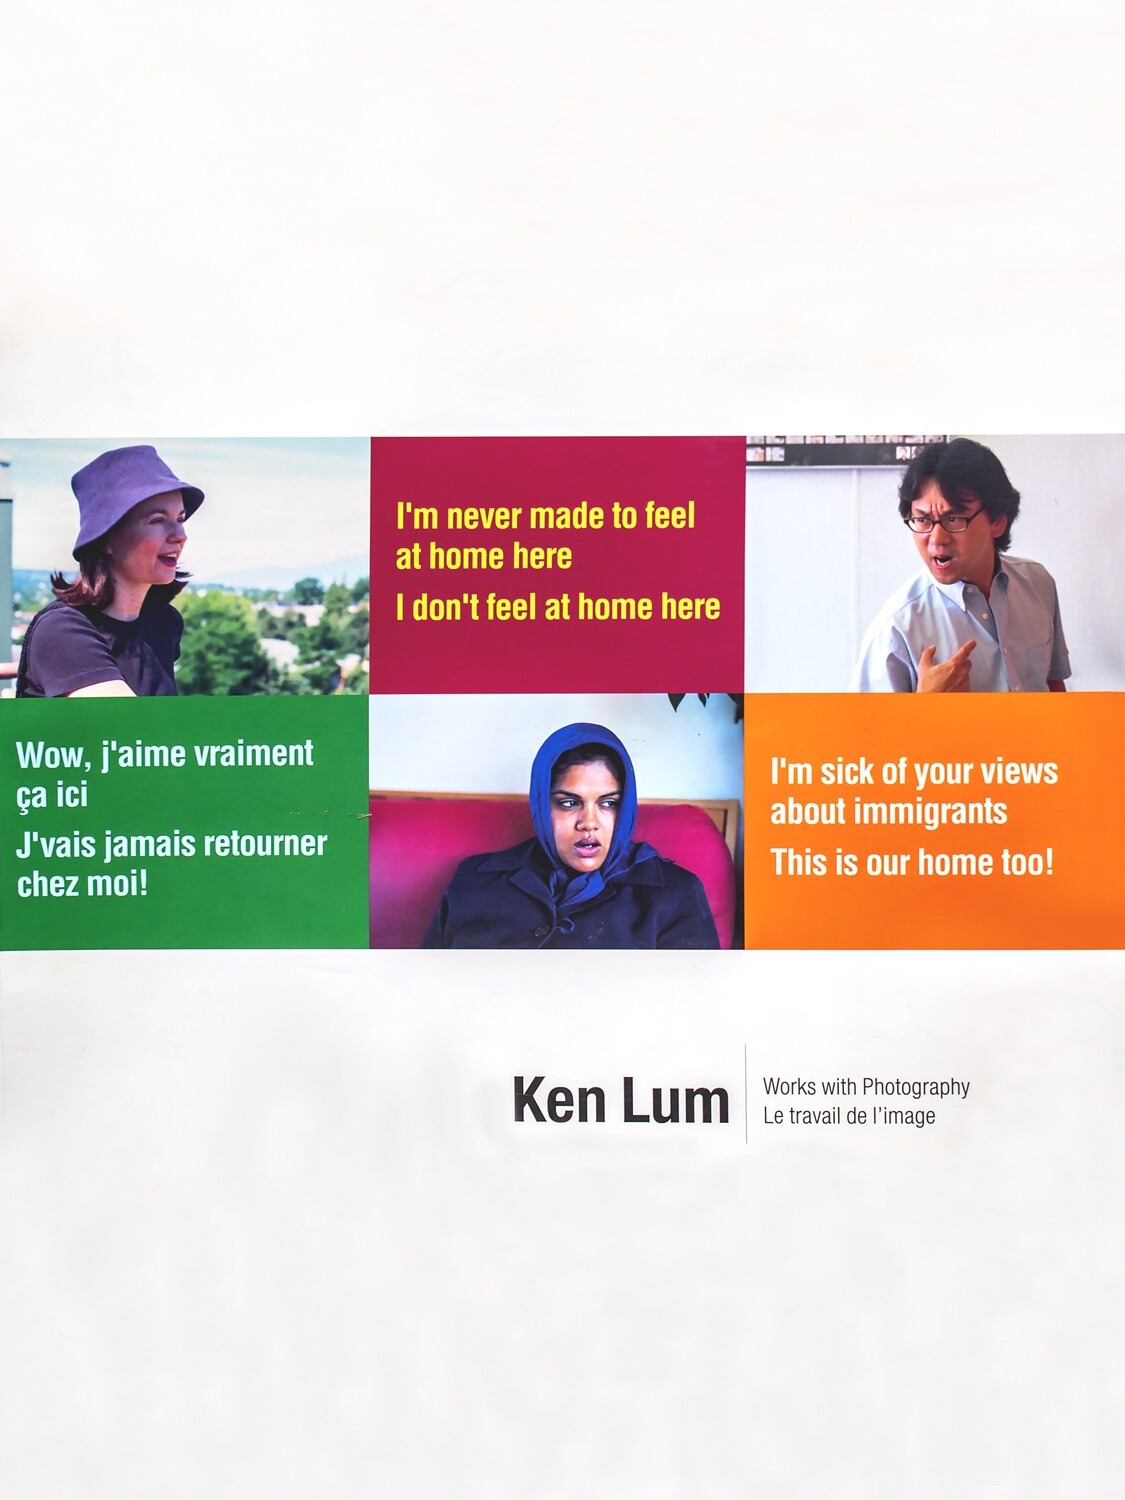 Ken Lum: Works with Photography